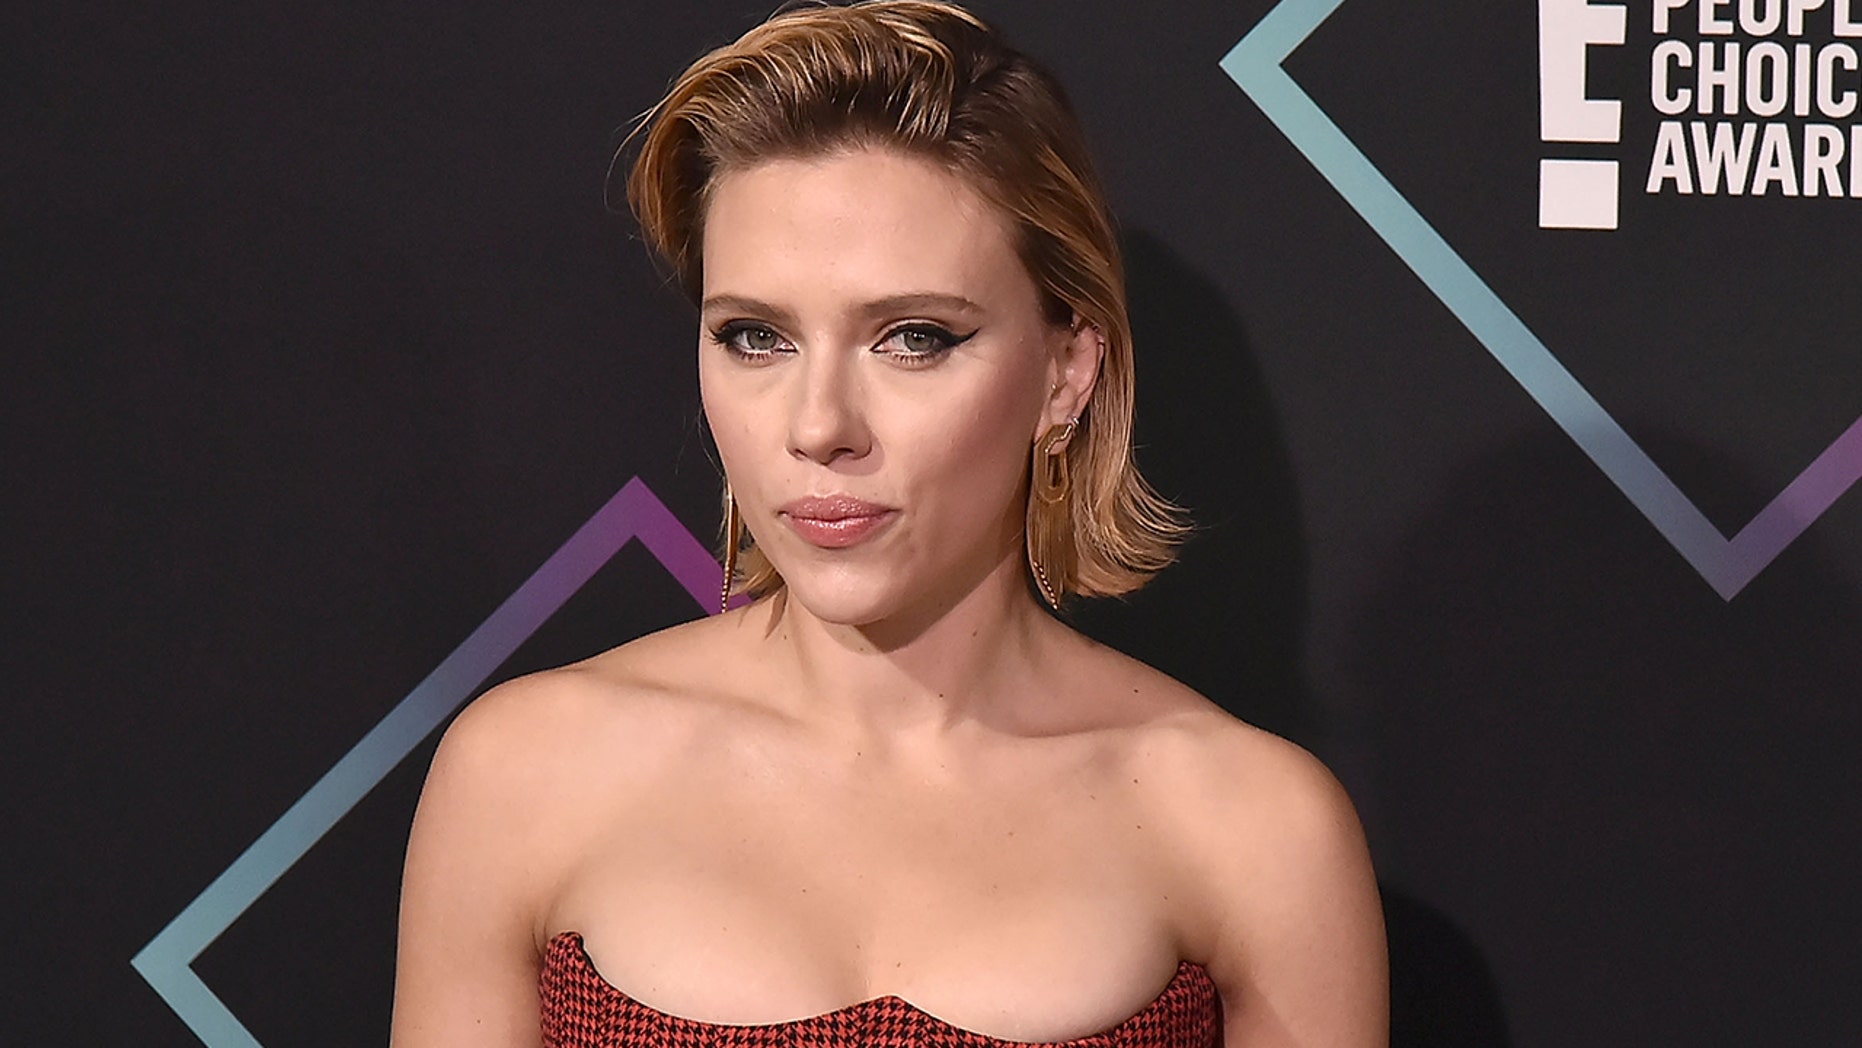 Scarlett Johansson speaks out on fake, AI-generated sex videos online